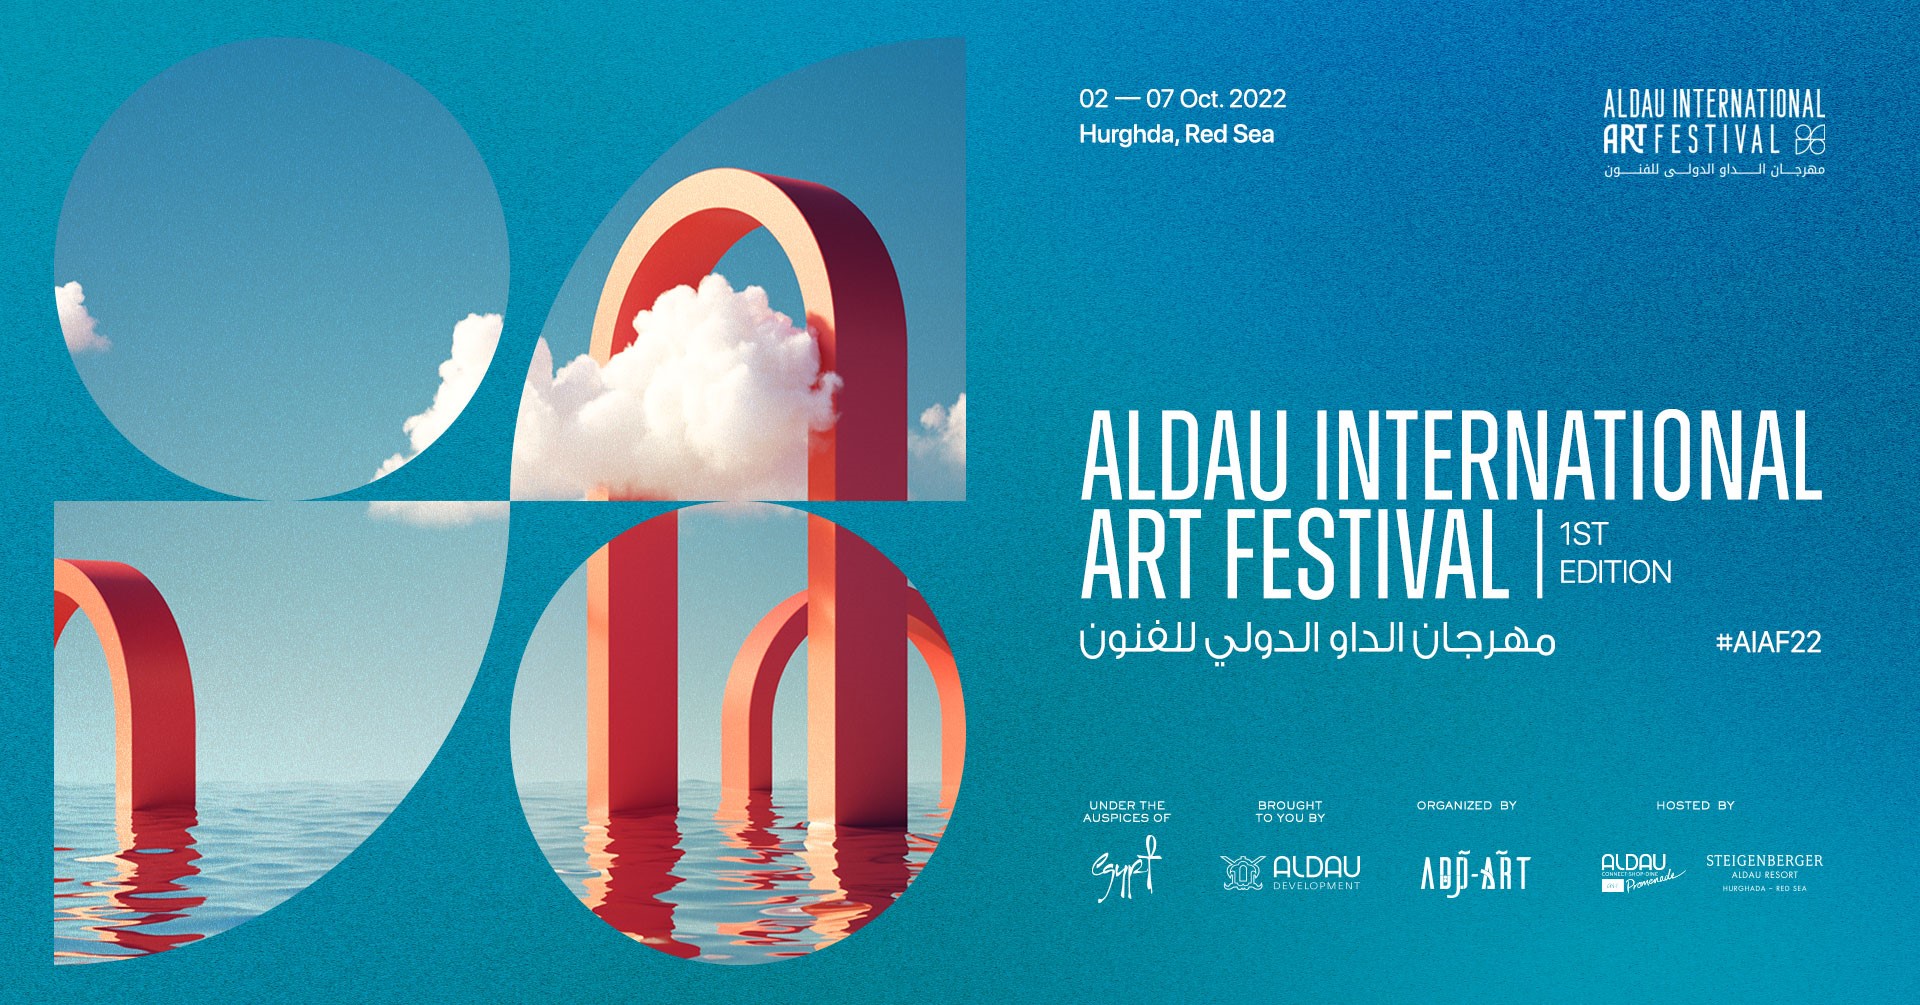 ADD ART, An Art Subsidiary of ALDAU Development Launches The First Edition of ALDAU International Art Festival in Hurghada This October 